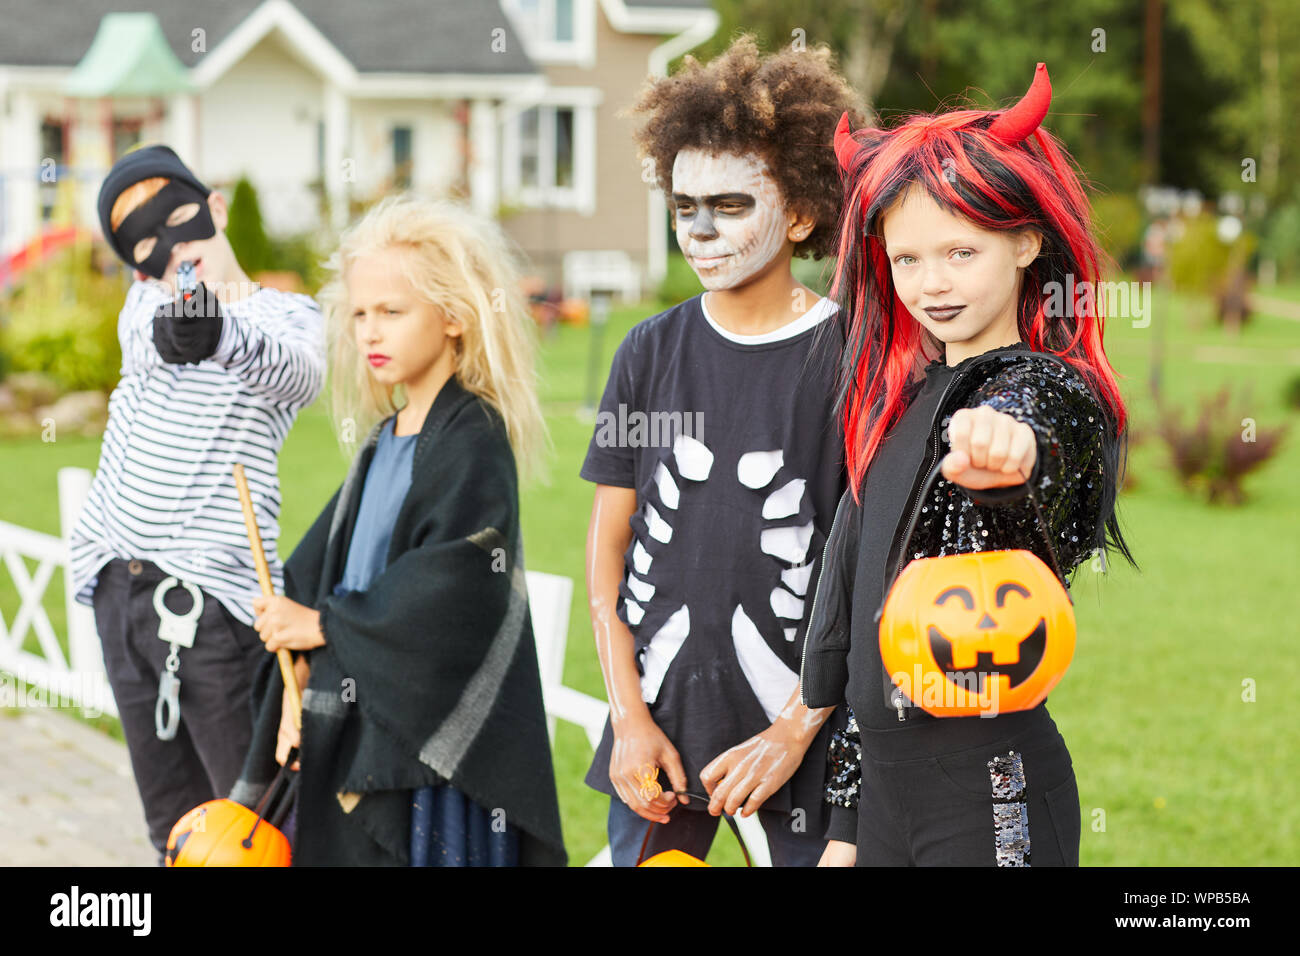 Group of children trick or treating on Halloween, all wearing costumes while posing outdoors Stock Photo